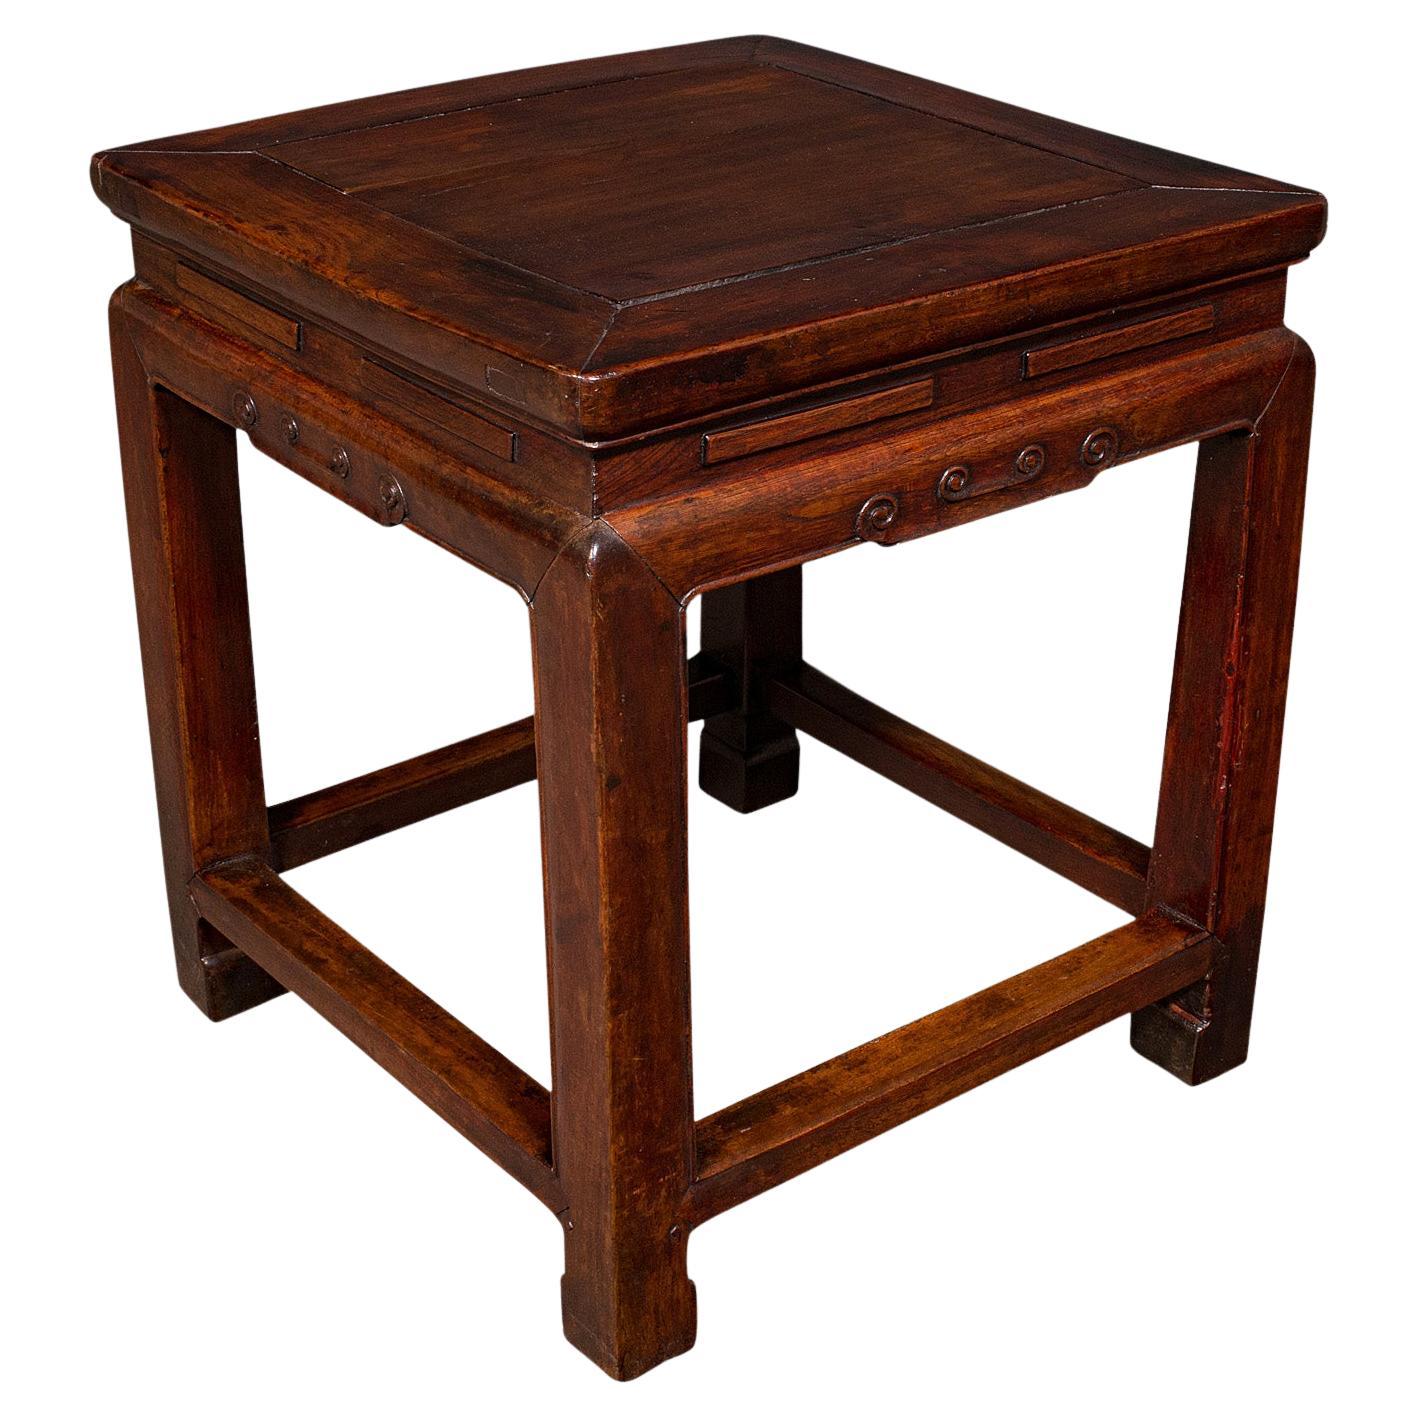 Small Antique Occasional Table, Oriental, Chinese Elm, Accent Stool, Victorian